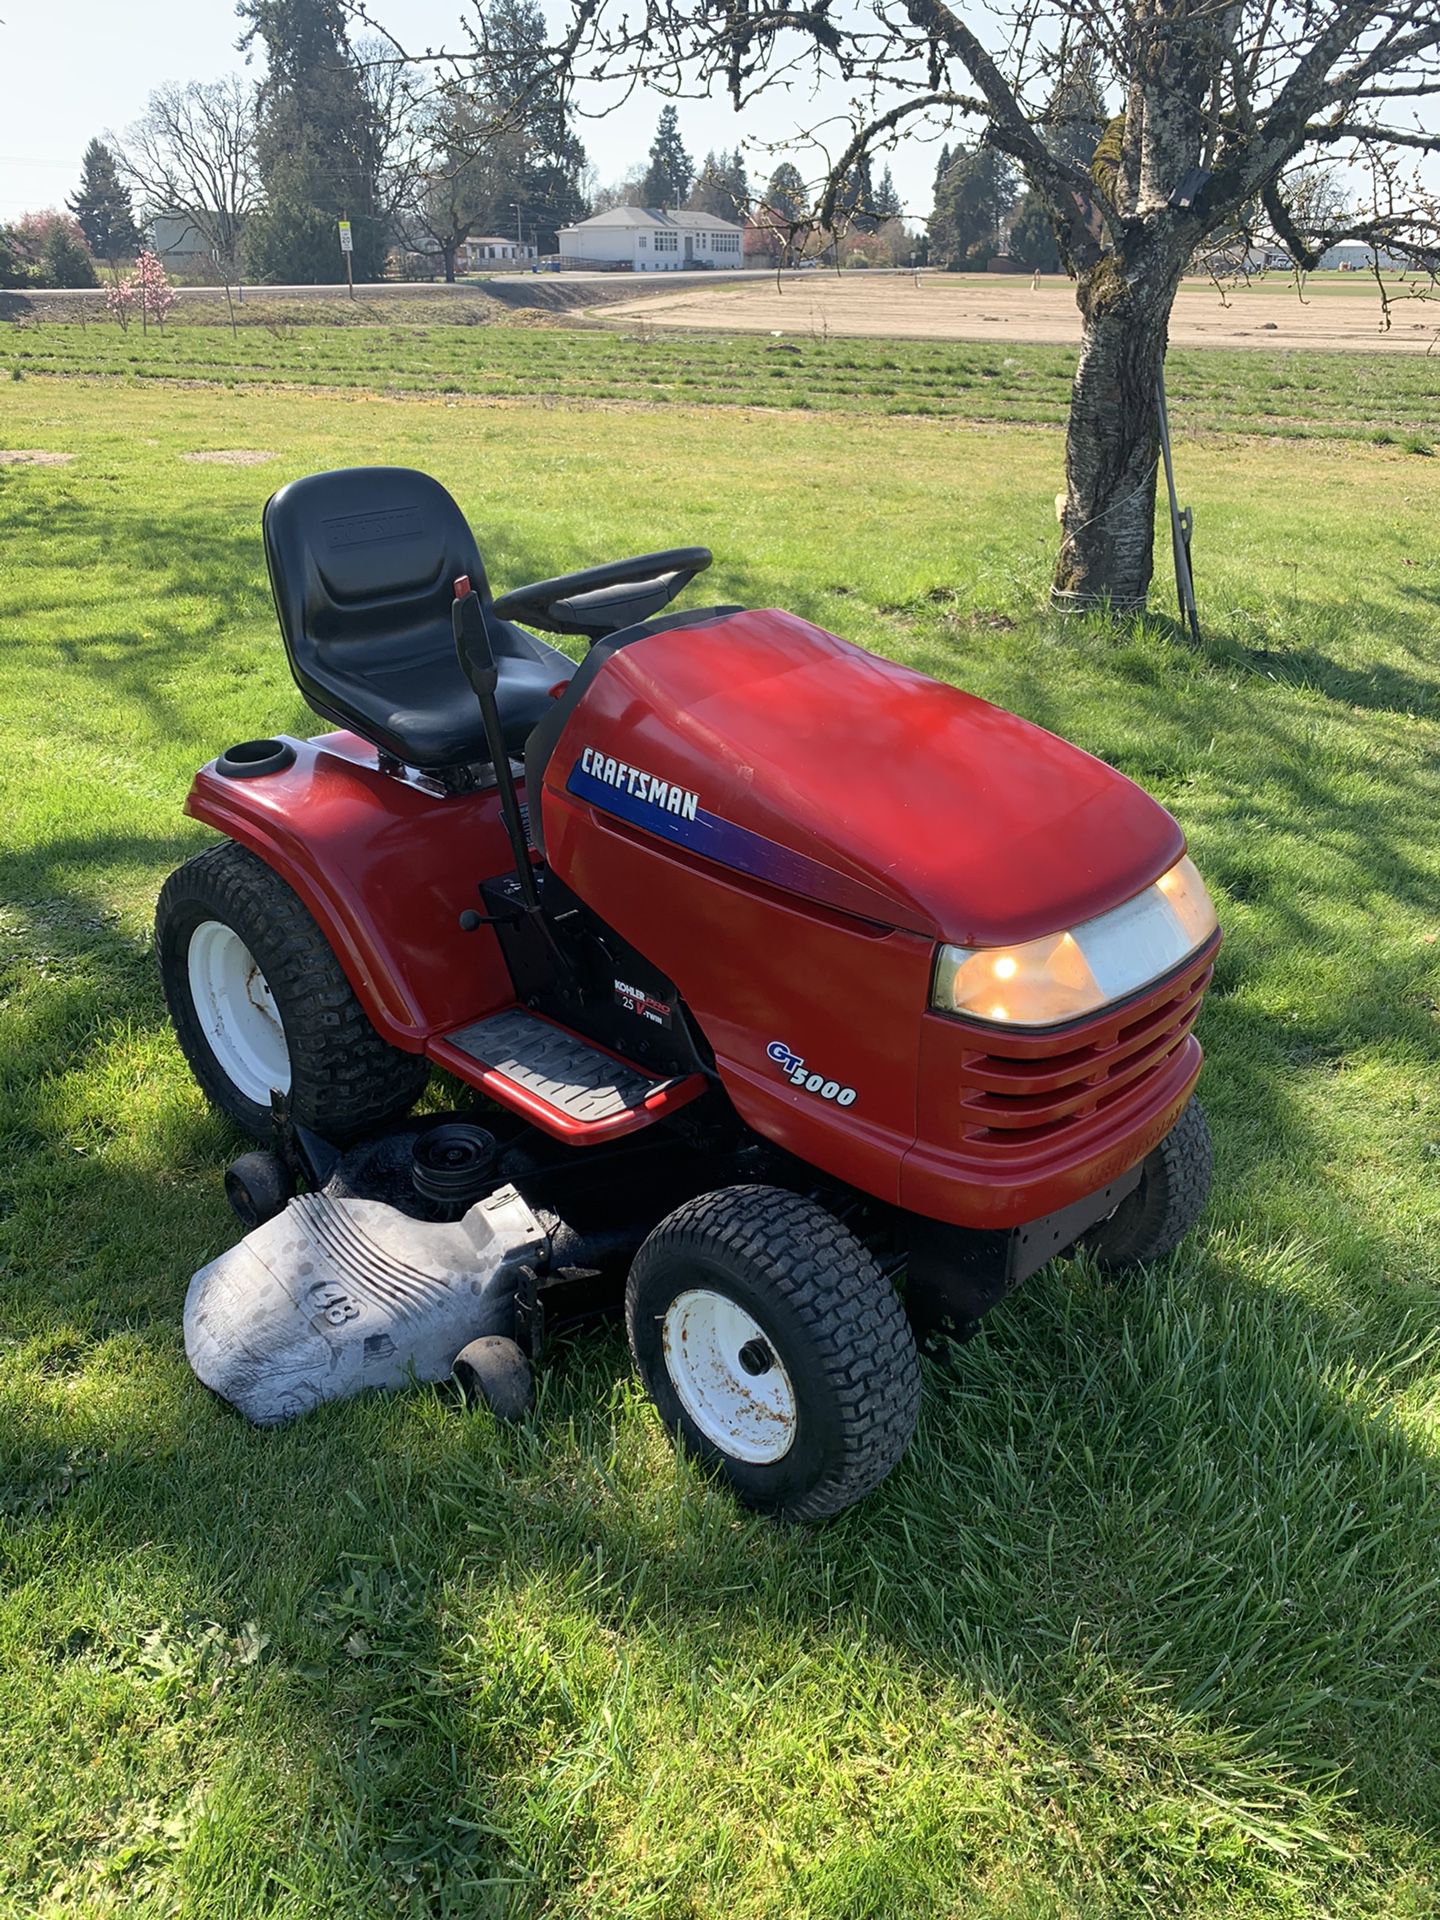 Craftsman GT5000 garden tractor/lawn mower!!! Free delivery!!!